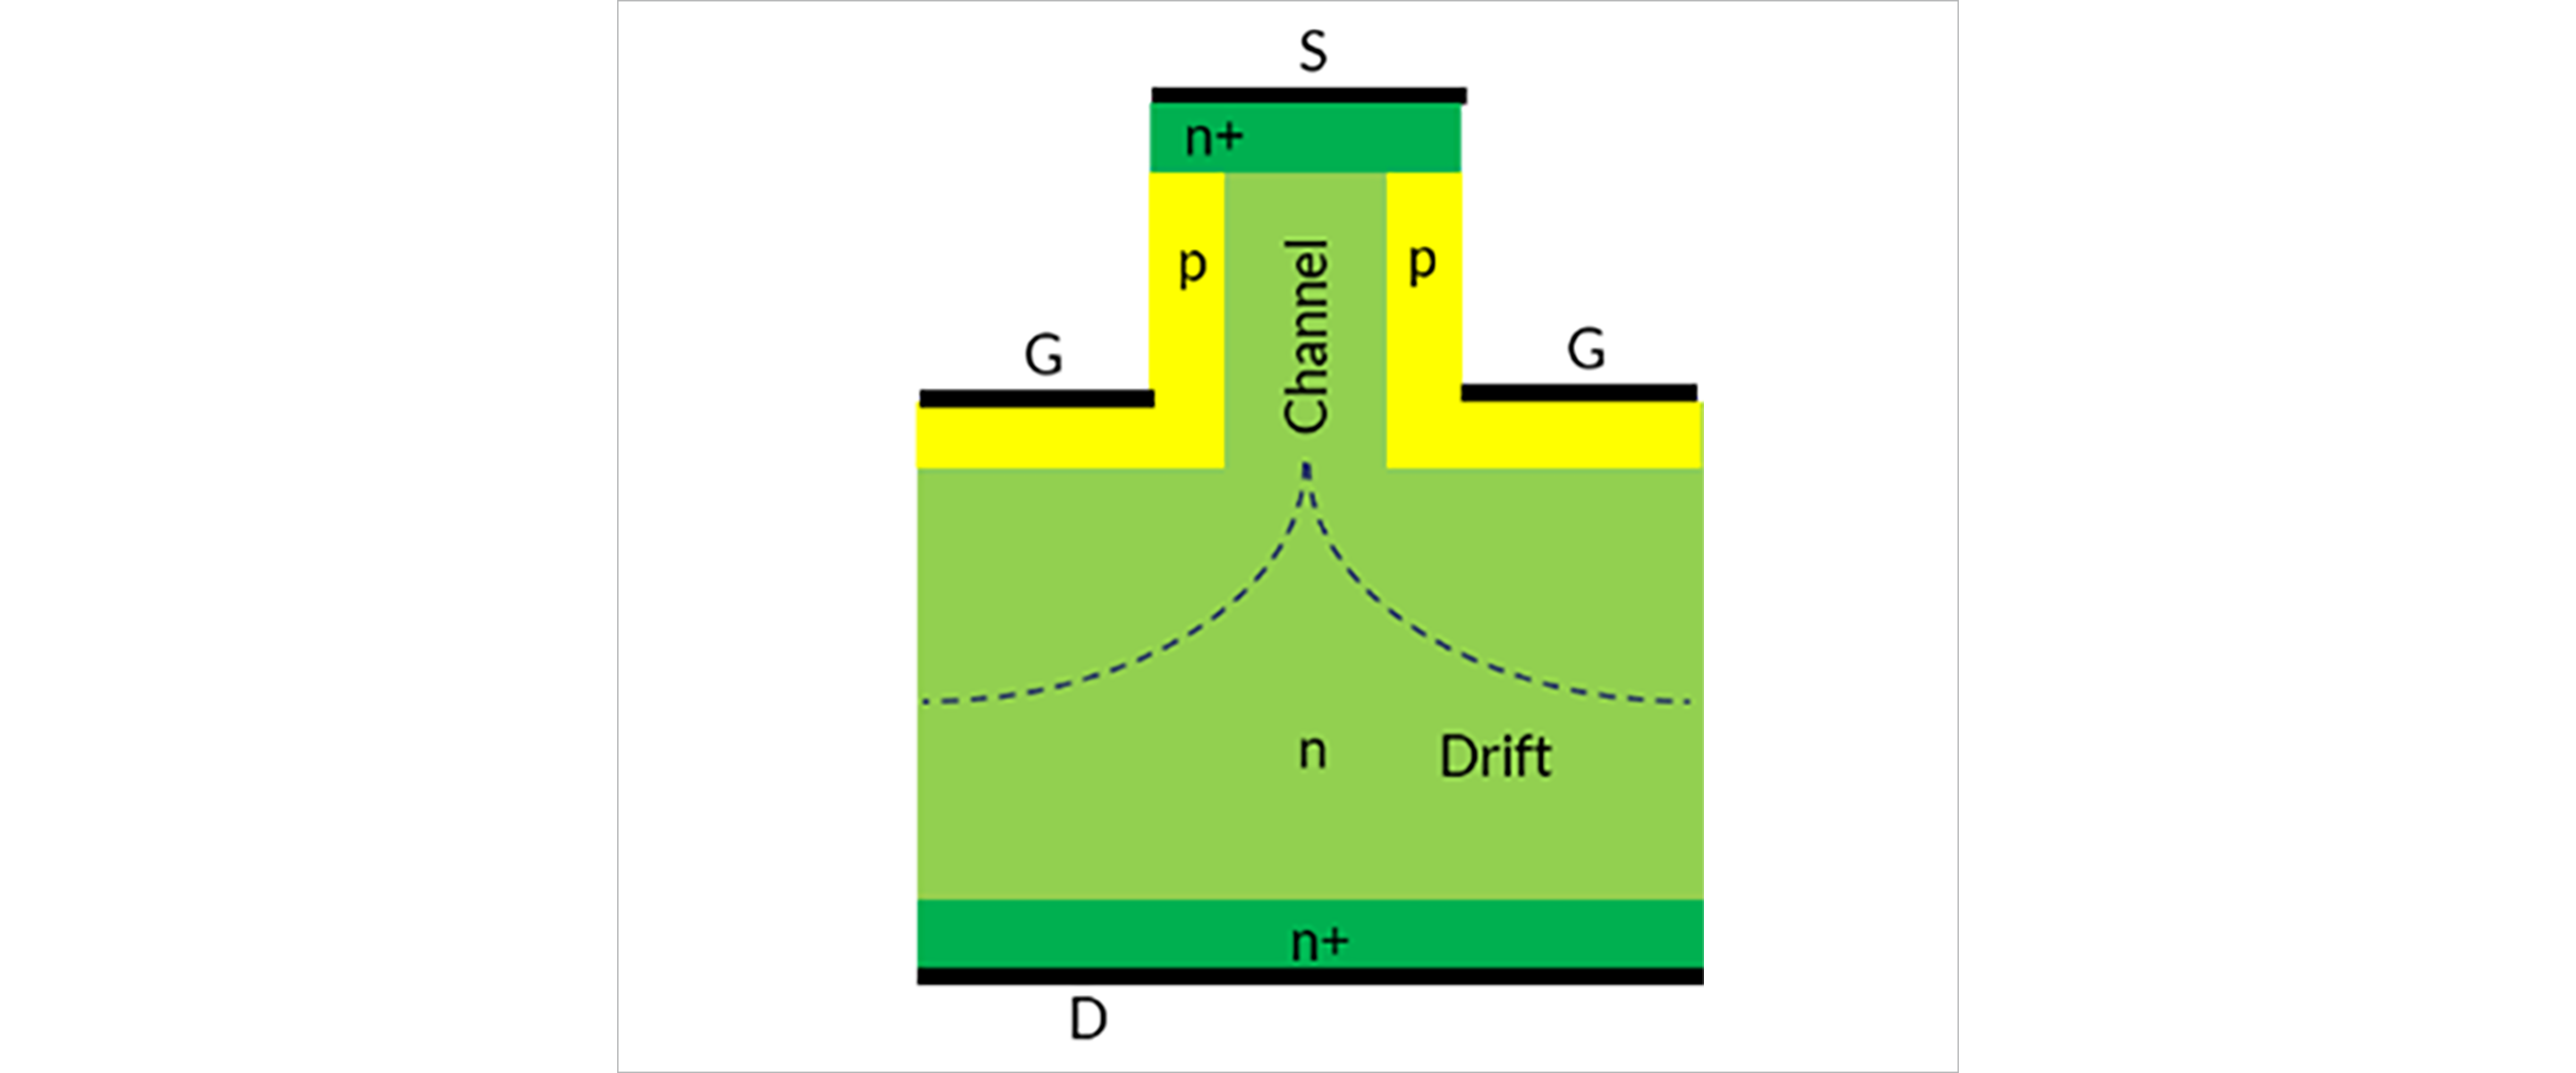 Figure 5: Unit cell in JFET structure with (a) no gate oxide and (b) two PN junctions (gate-drain and gate-source) highlighted.